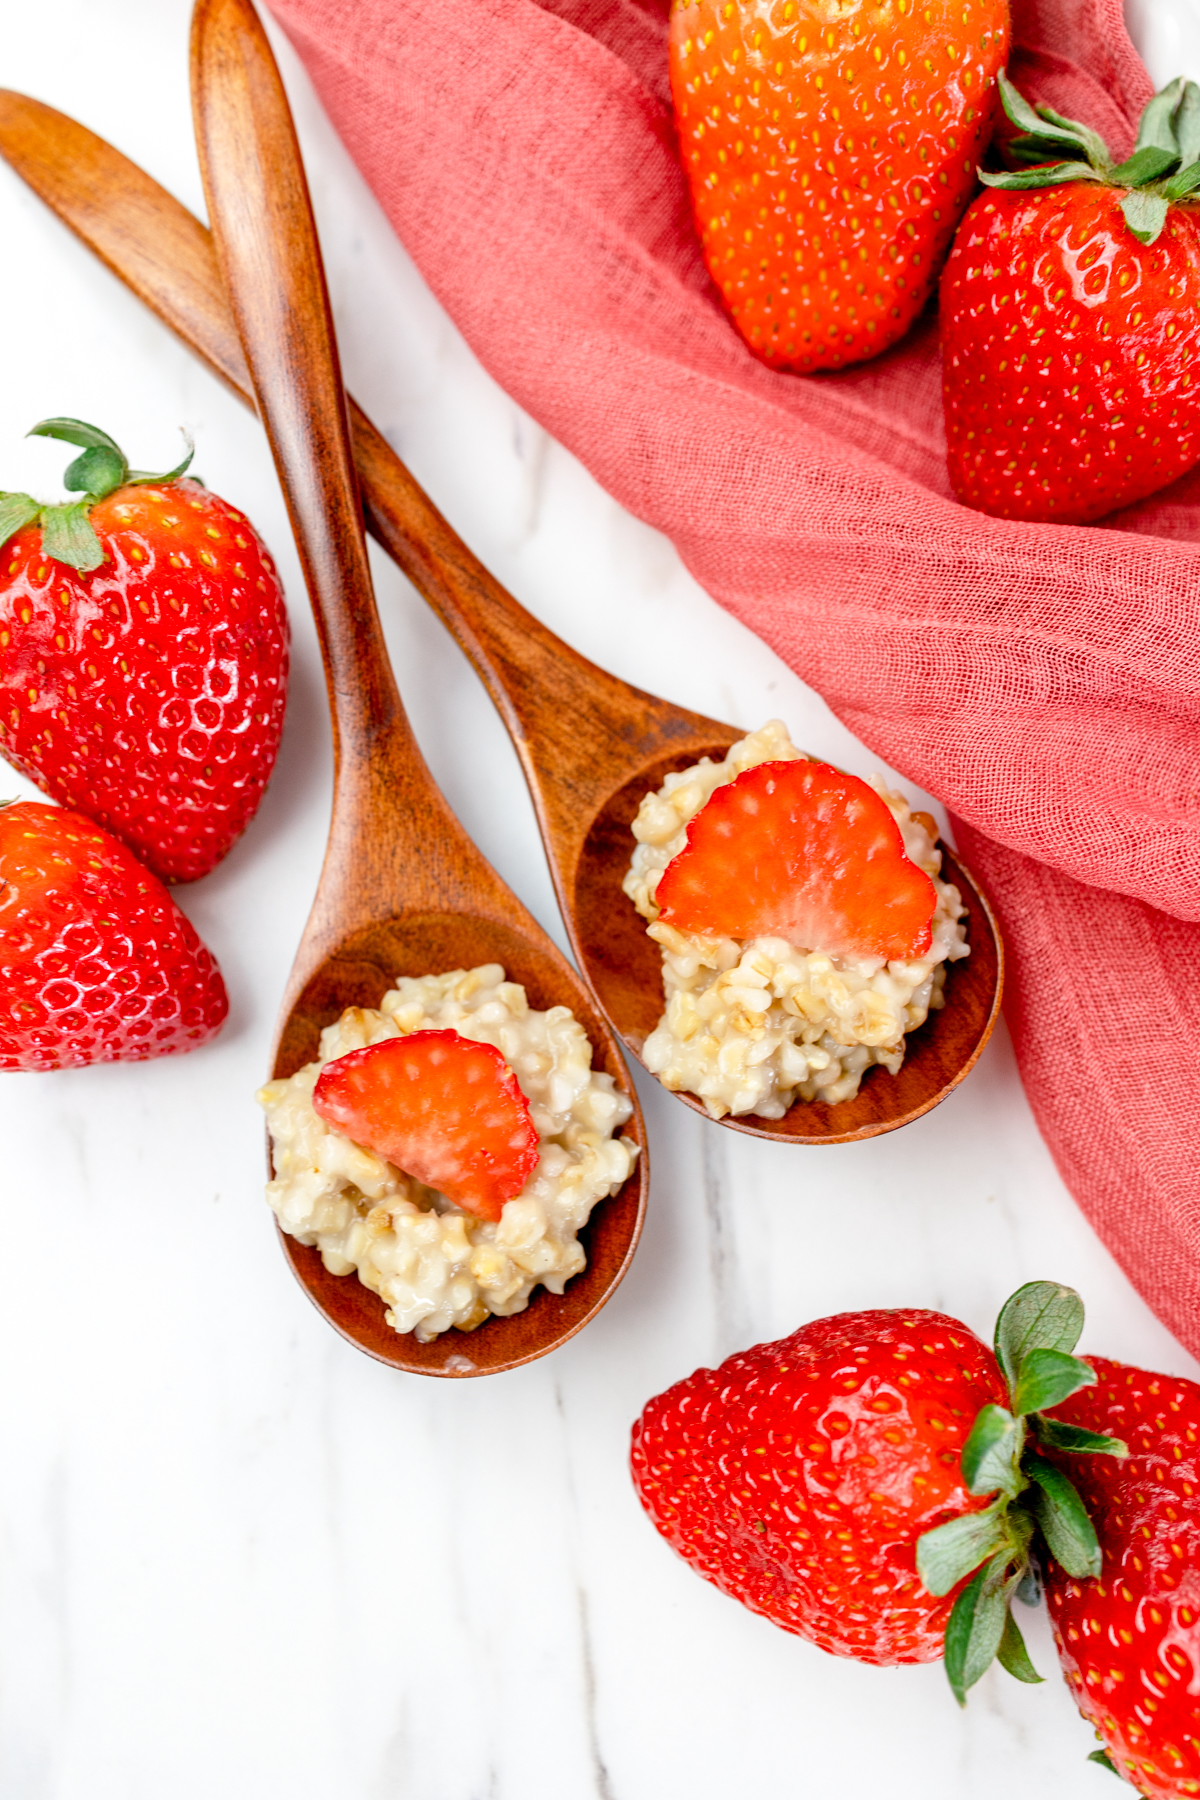 Top view of two wooden spoons with steel cut oat porridge in them and a slice of strawberry on top, on a table next to fresh strawberries. 